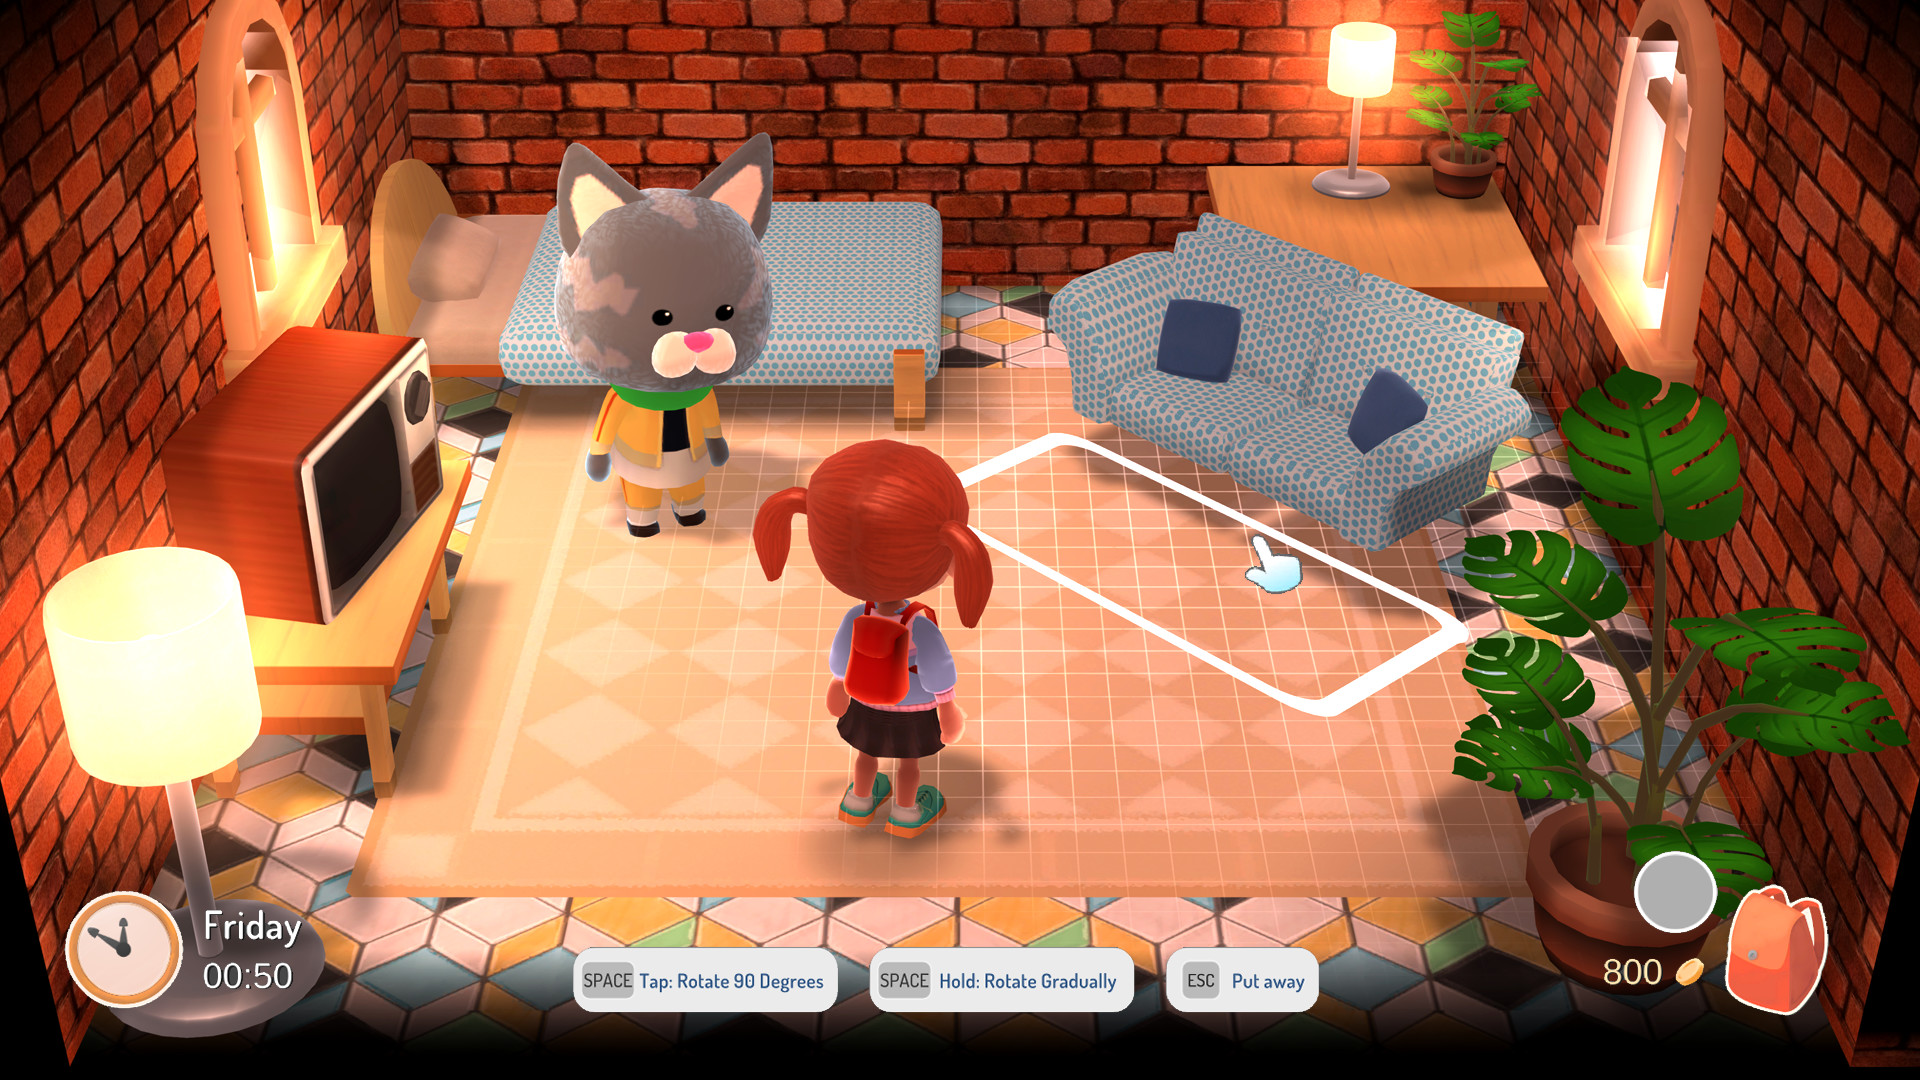 equip and dequip animal crossing pc